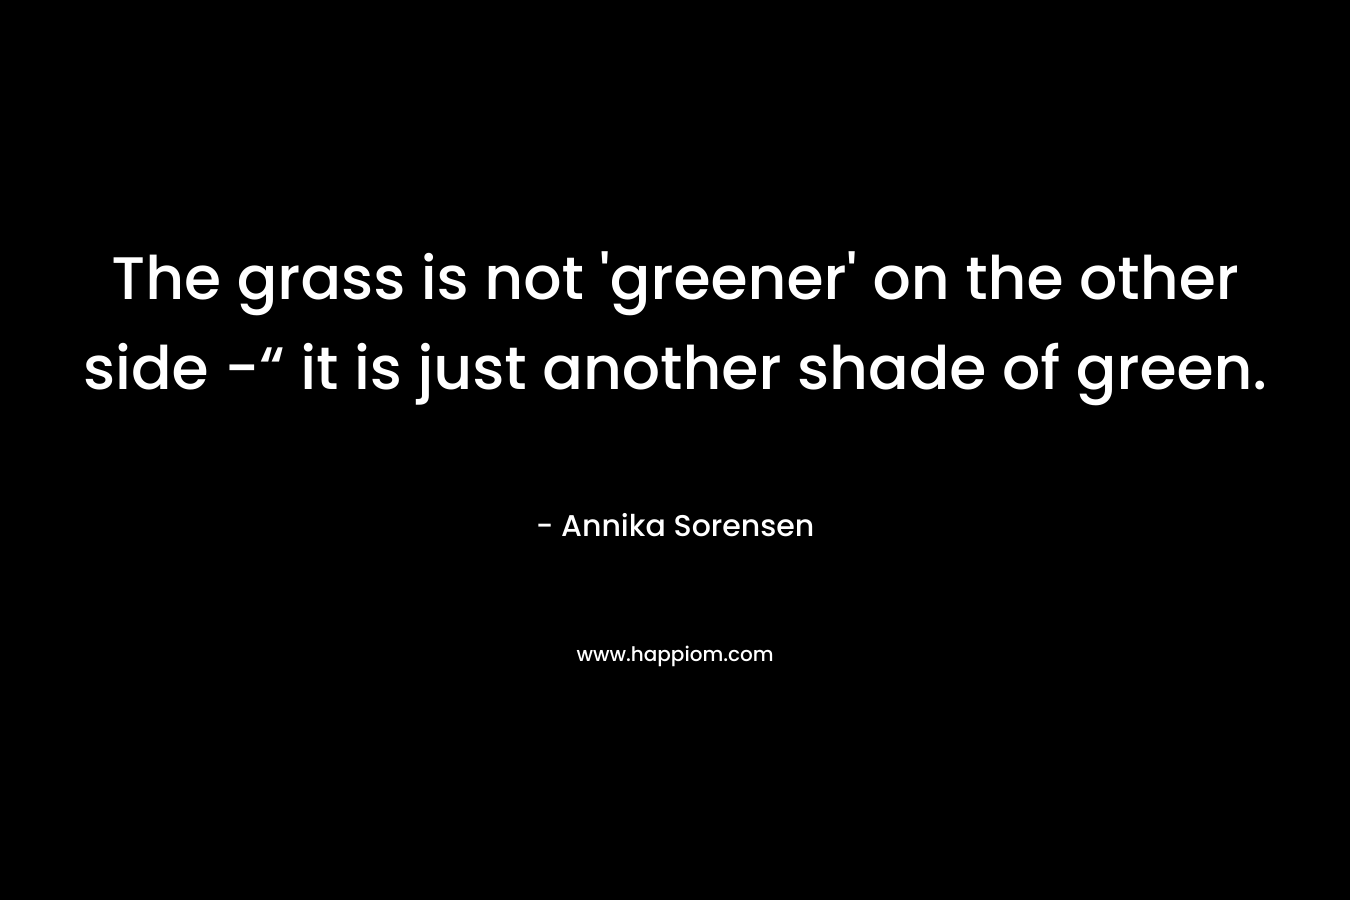 The grass is not 'greener' on the other side -“ it is just another shade of green.